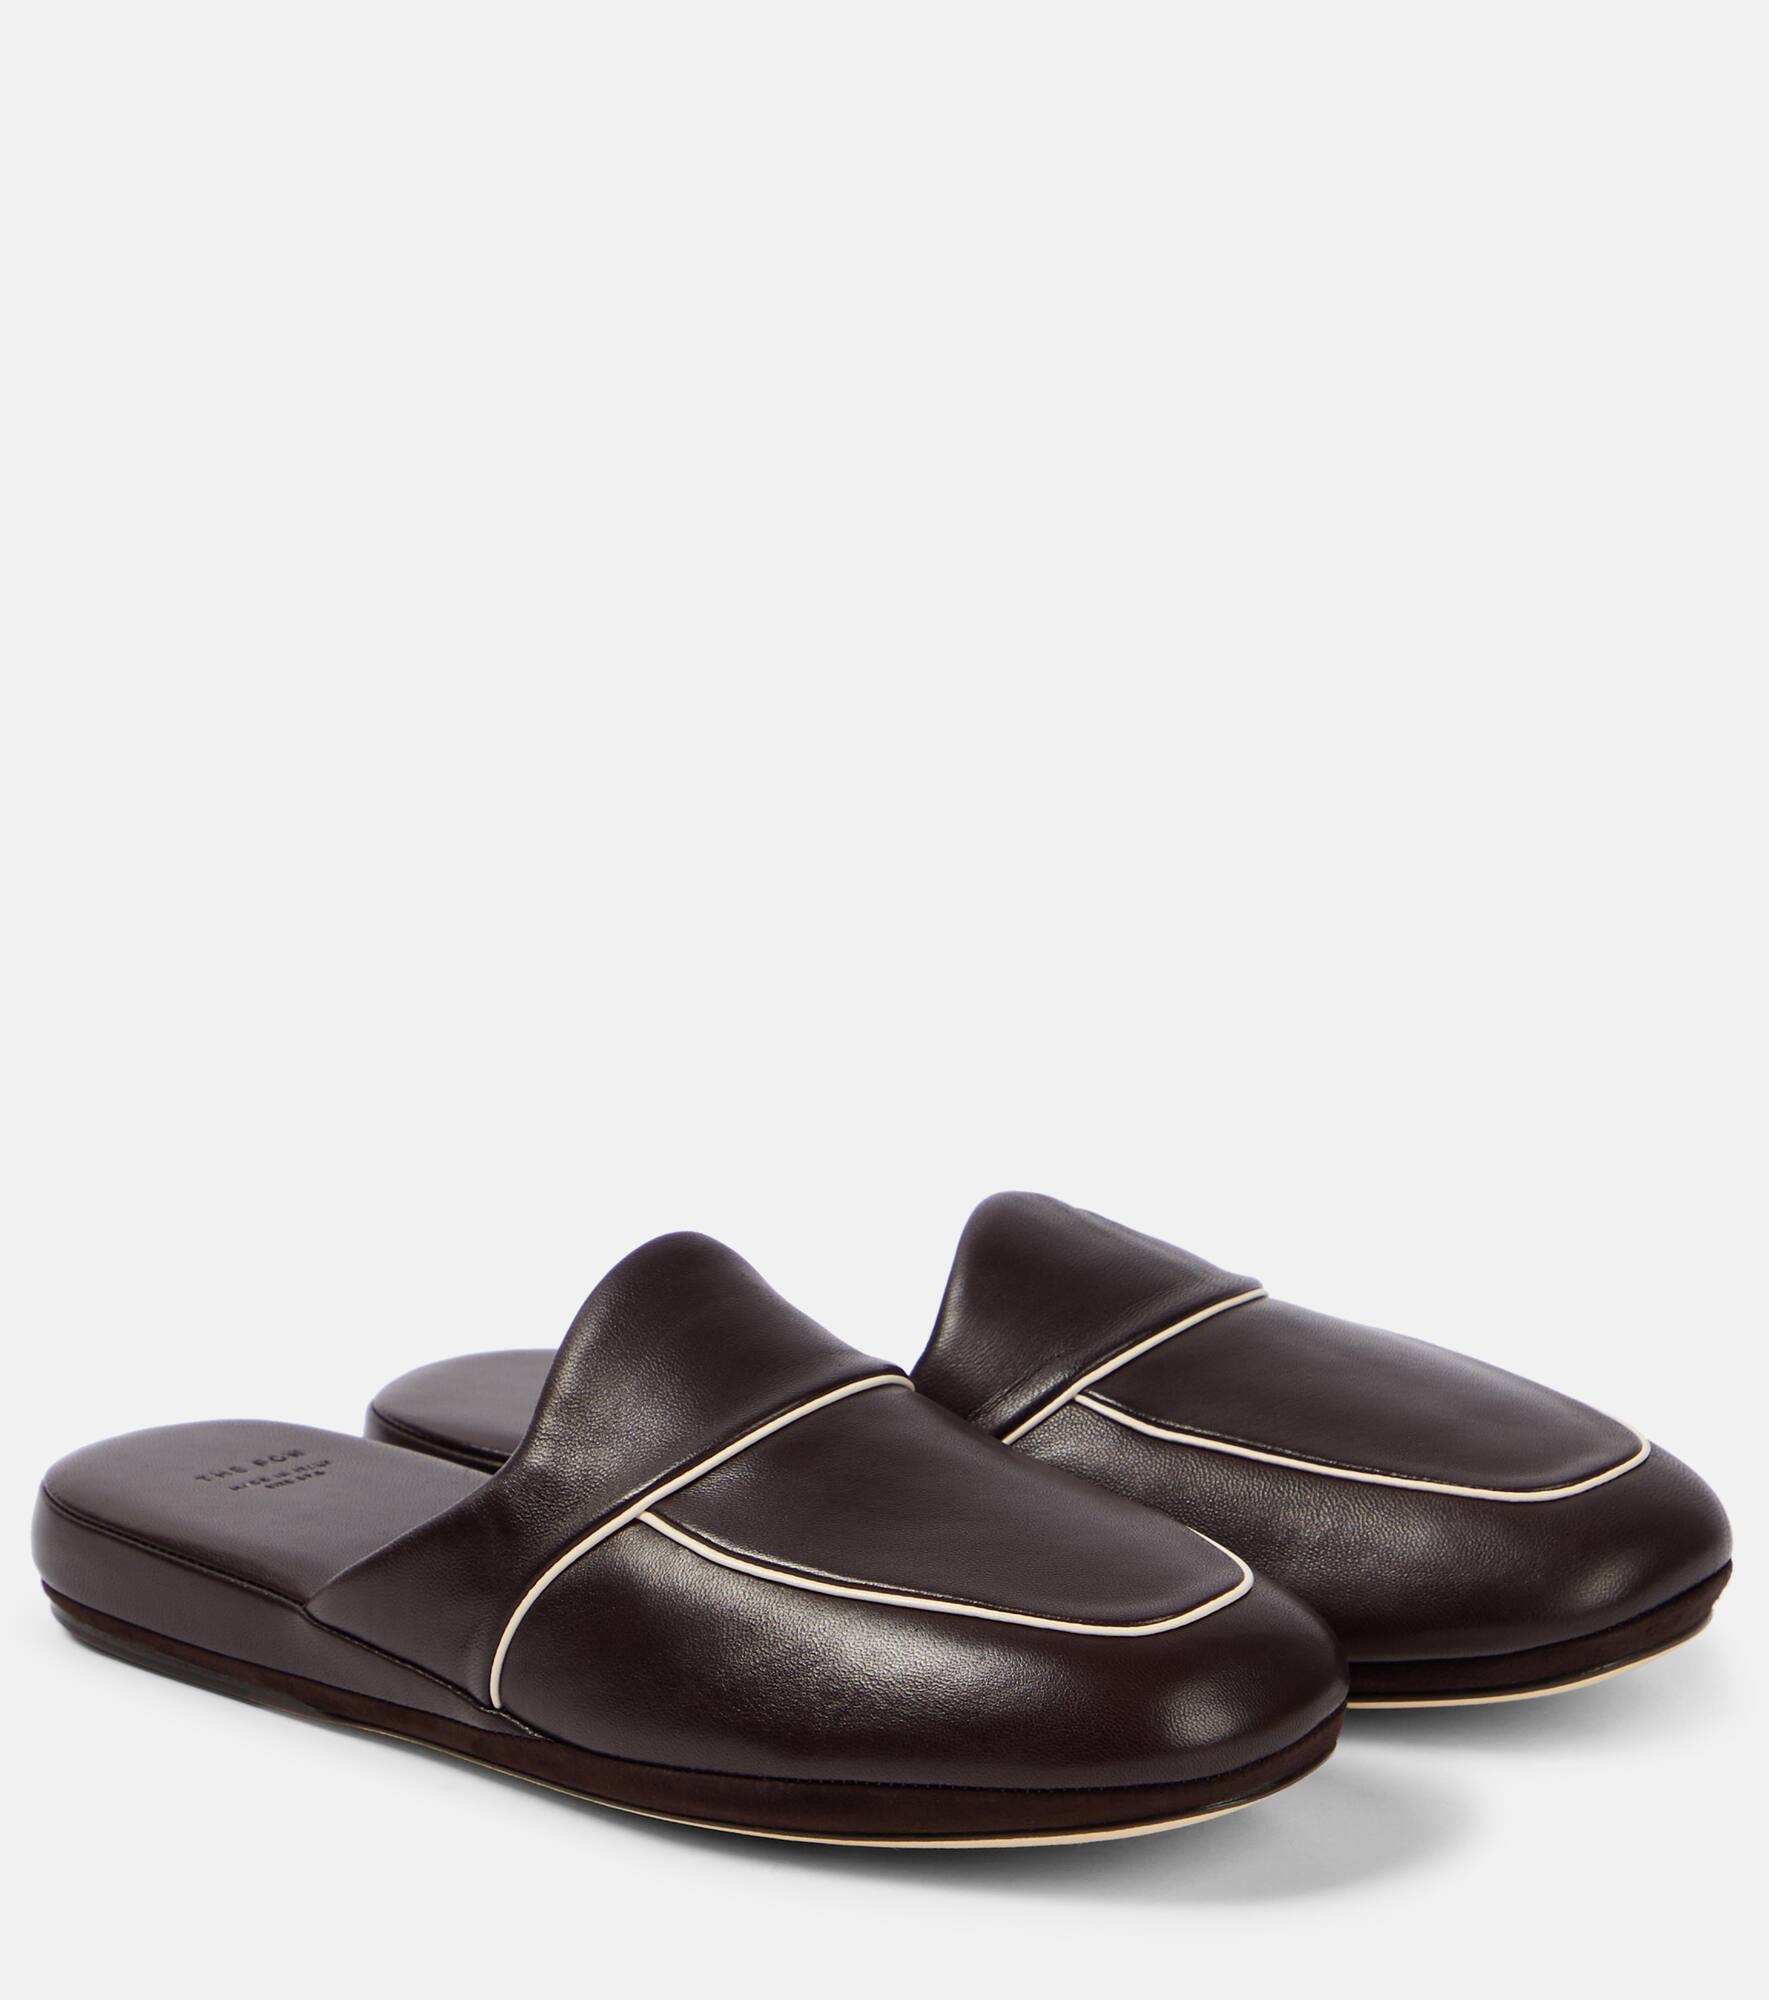 Beck leather mules - 1